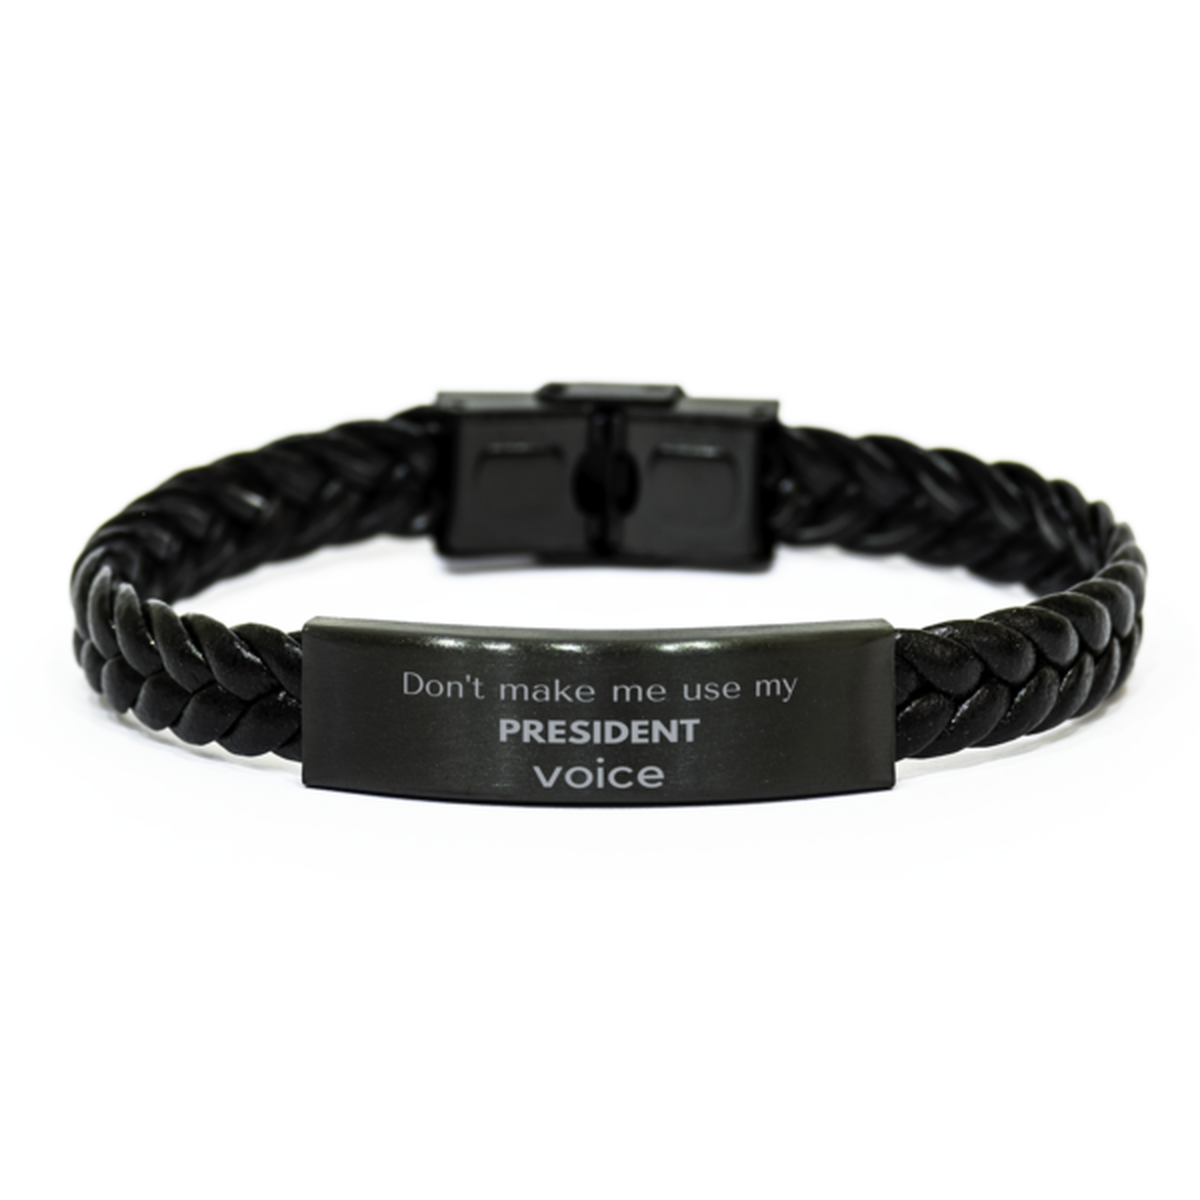 Don't make me use my President voice, Sarcasm President Gifts, Christmas President Braided Leather Bracelet Birthday Unique Gifts For President Coworkers, Men, Women, Colleague, Friends